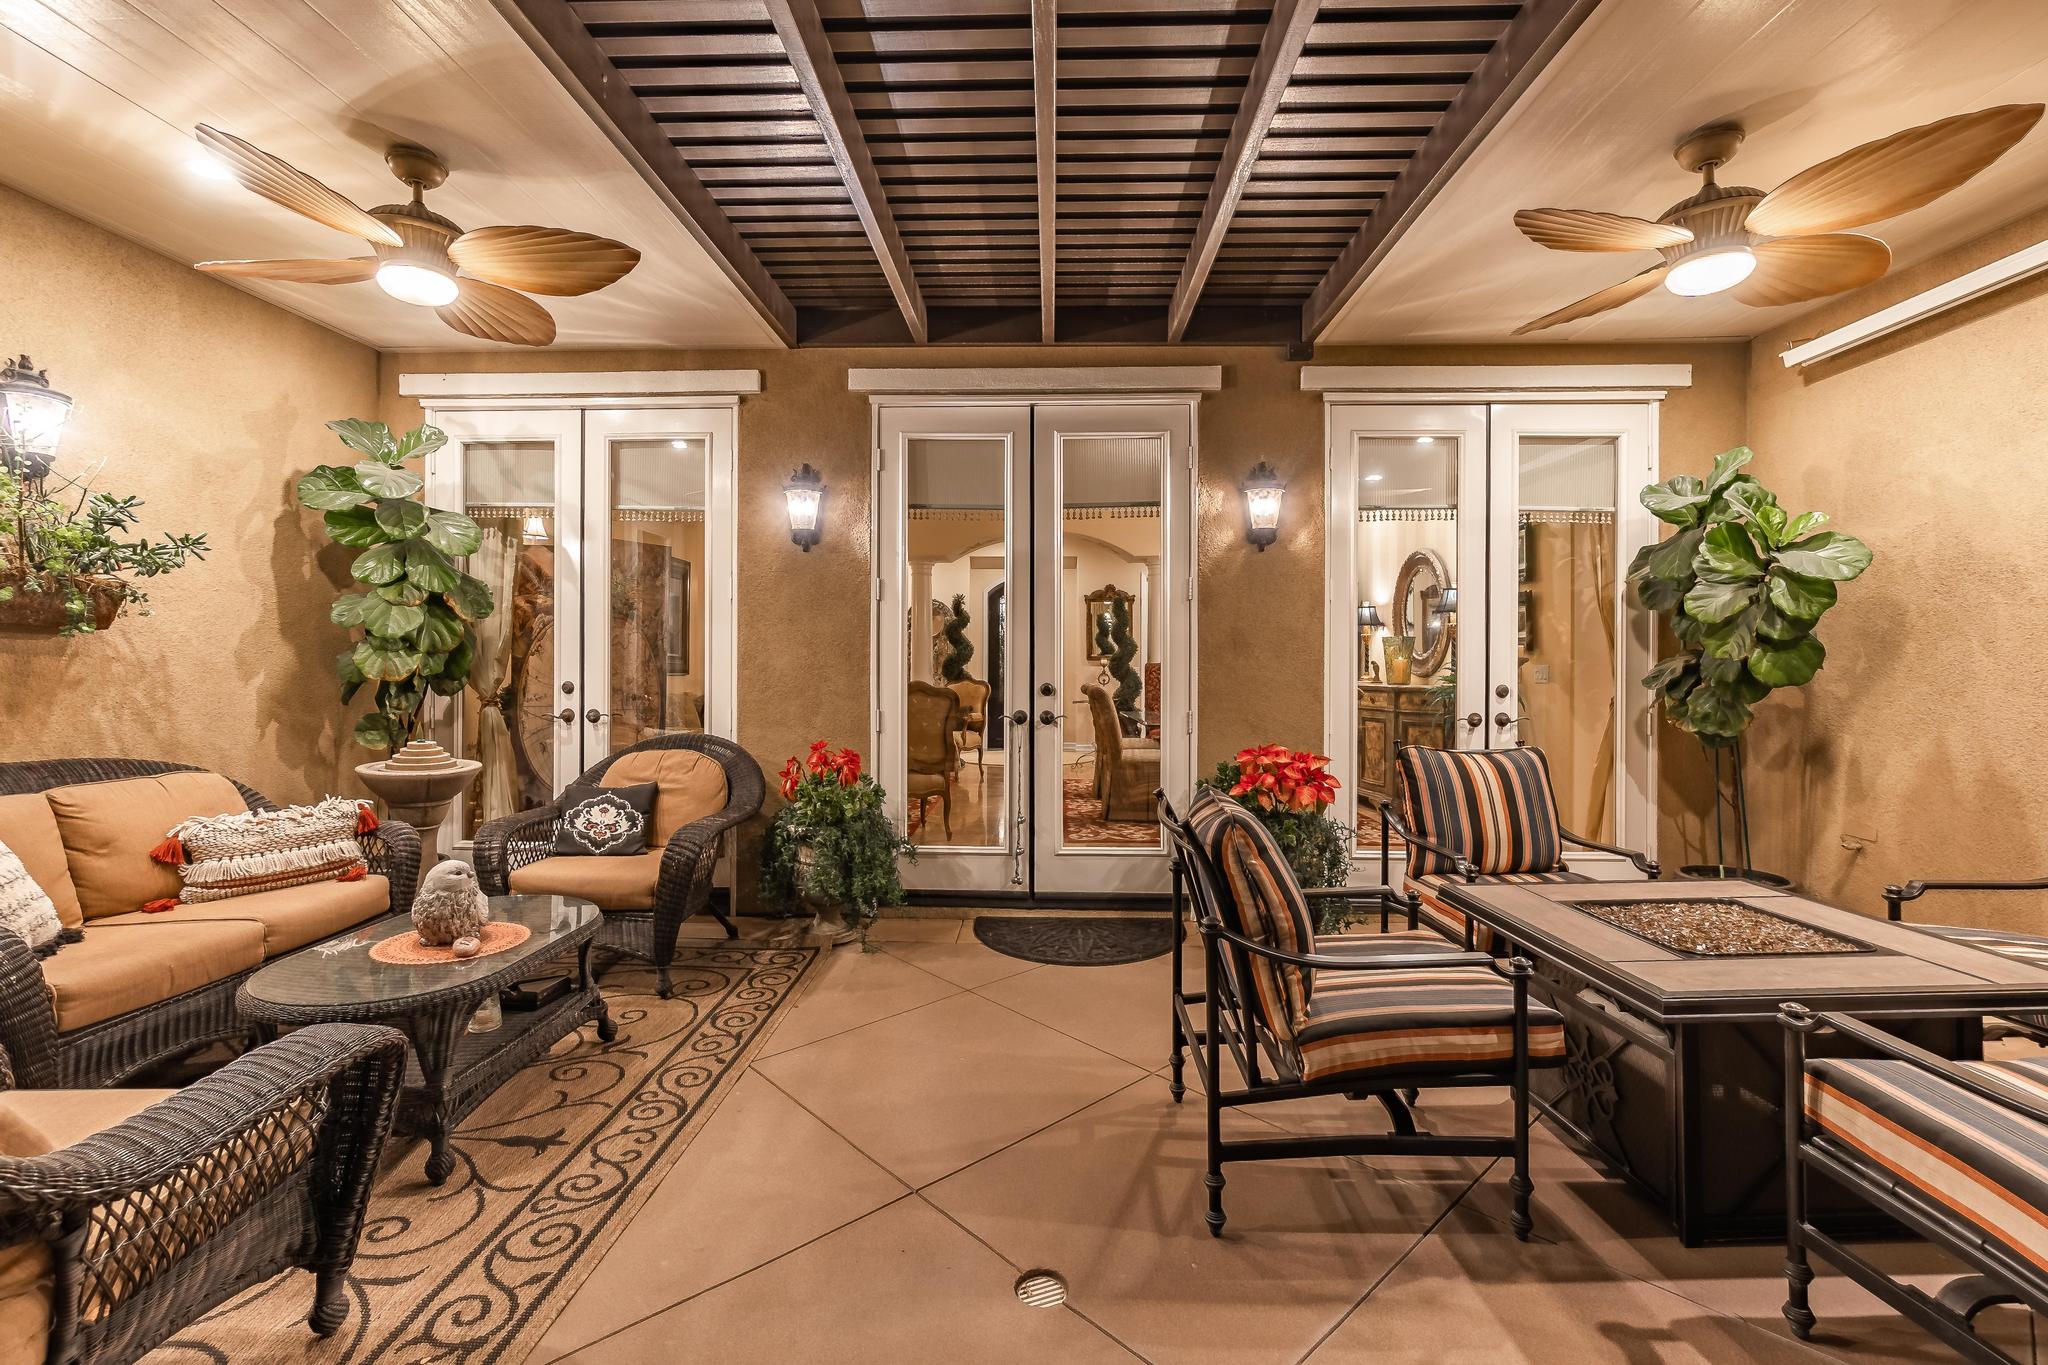 Tuscan-Inspired Olinda Ranch Villa – 467 Tangerine Place, Brea, CA 92823 - Back Patio/Entrance - Front Facing View